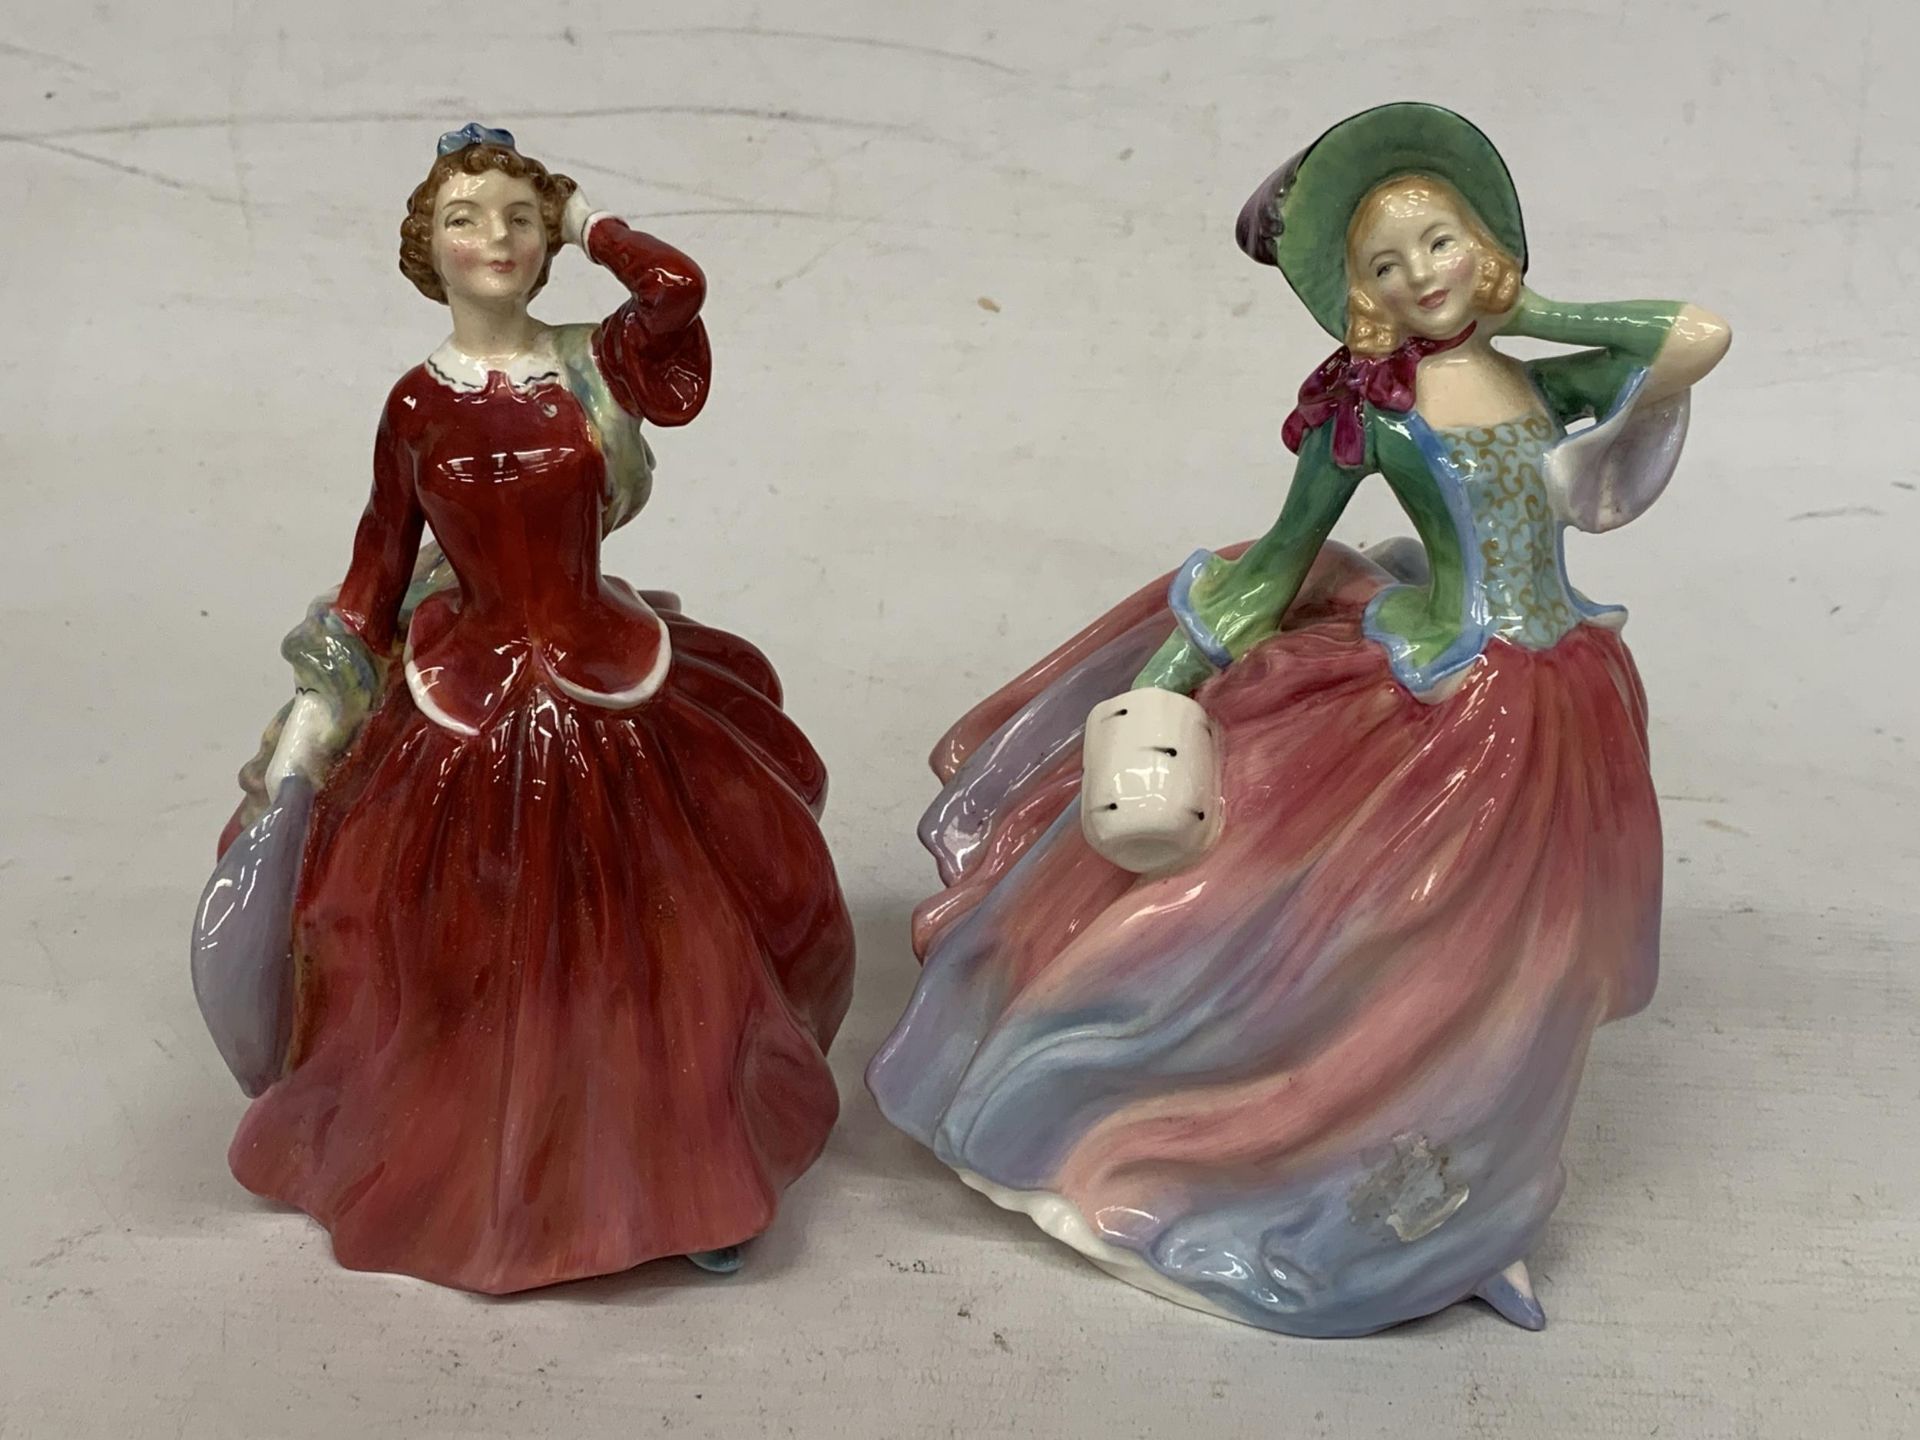 TWO ROYAL DOULTON FIGURINES "AUTUMN BREEZES" HN 1911 AND "BLITHE MORNING" HB 2045